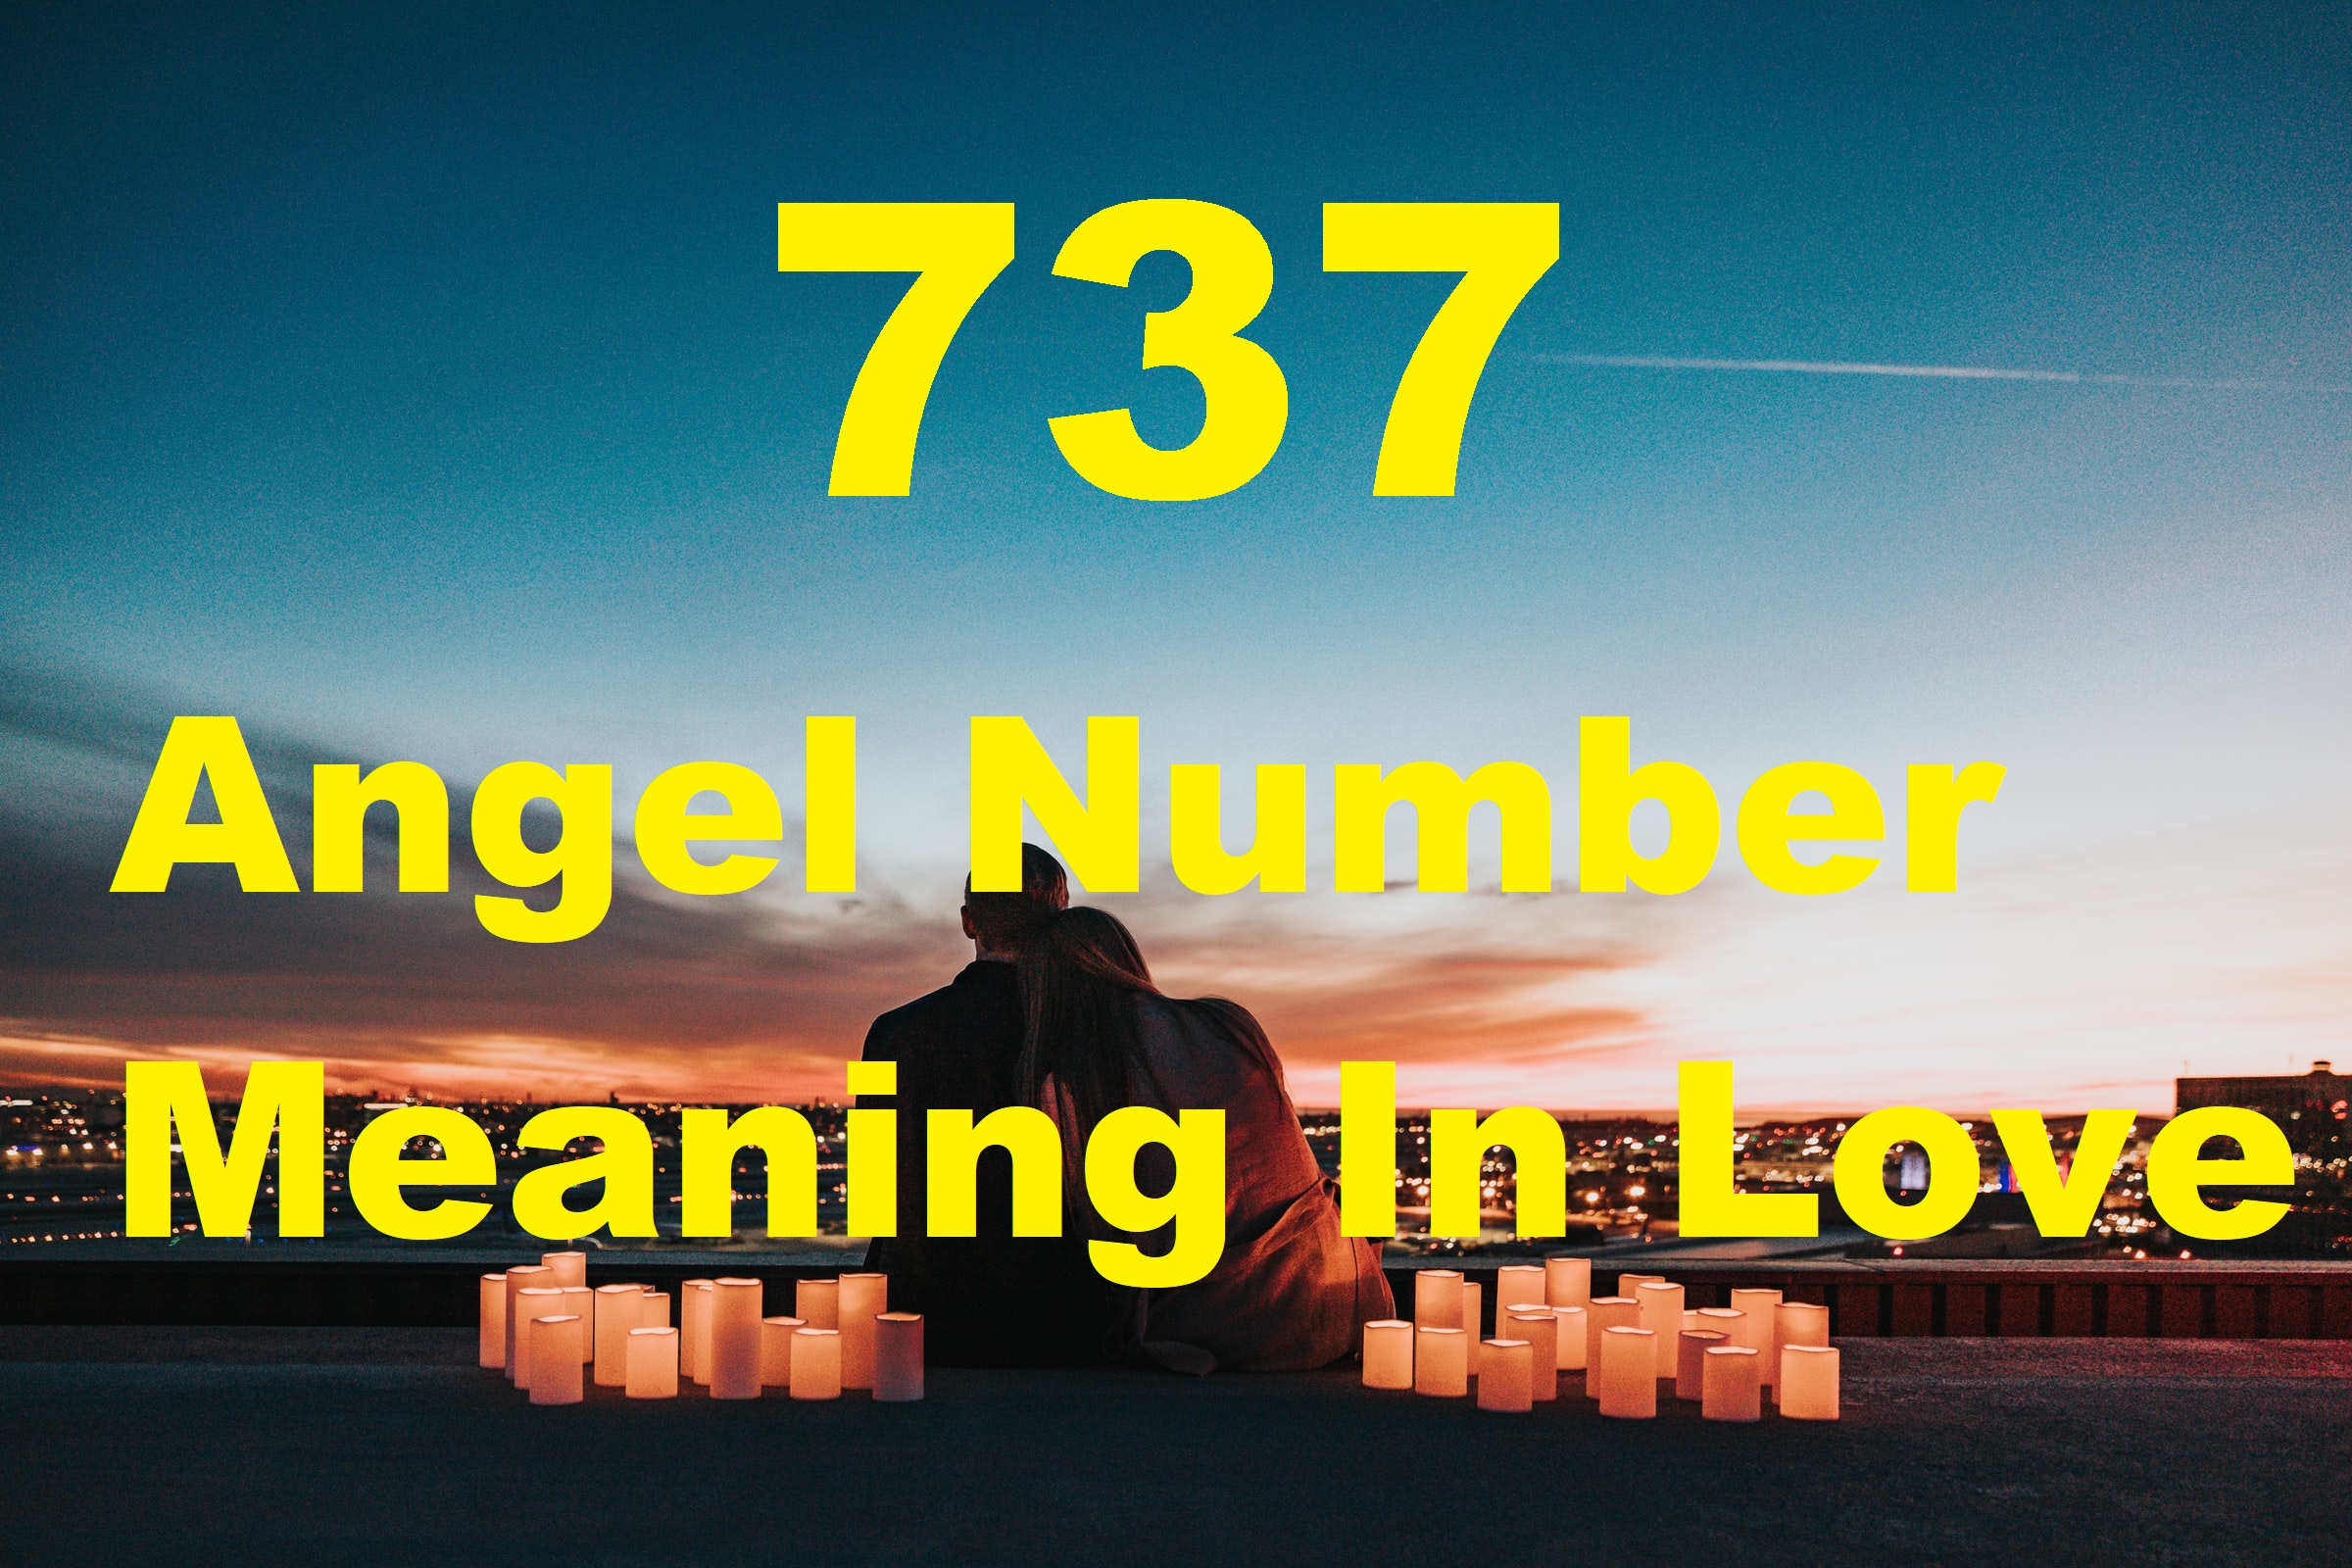 737 Angel Number Meaning In Love text with a background of a couple sitting in a rooftop overlooking a city